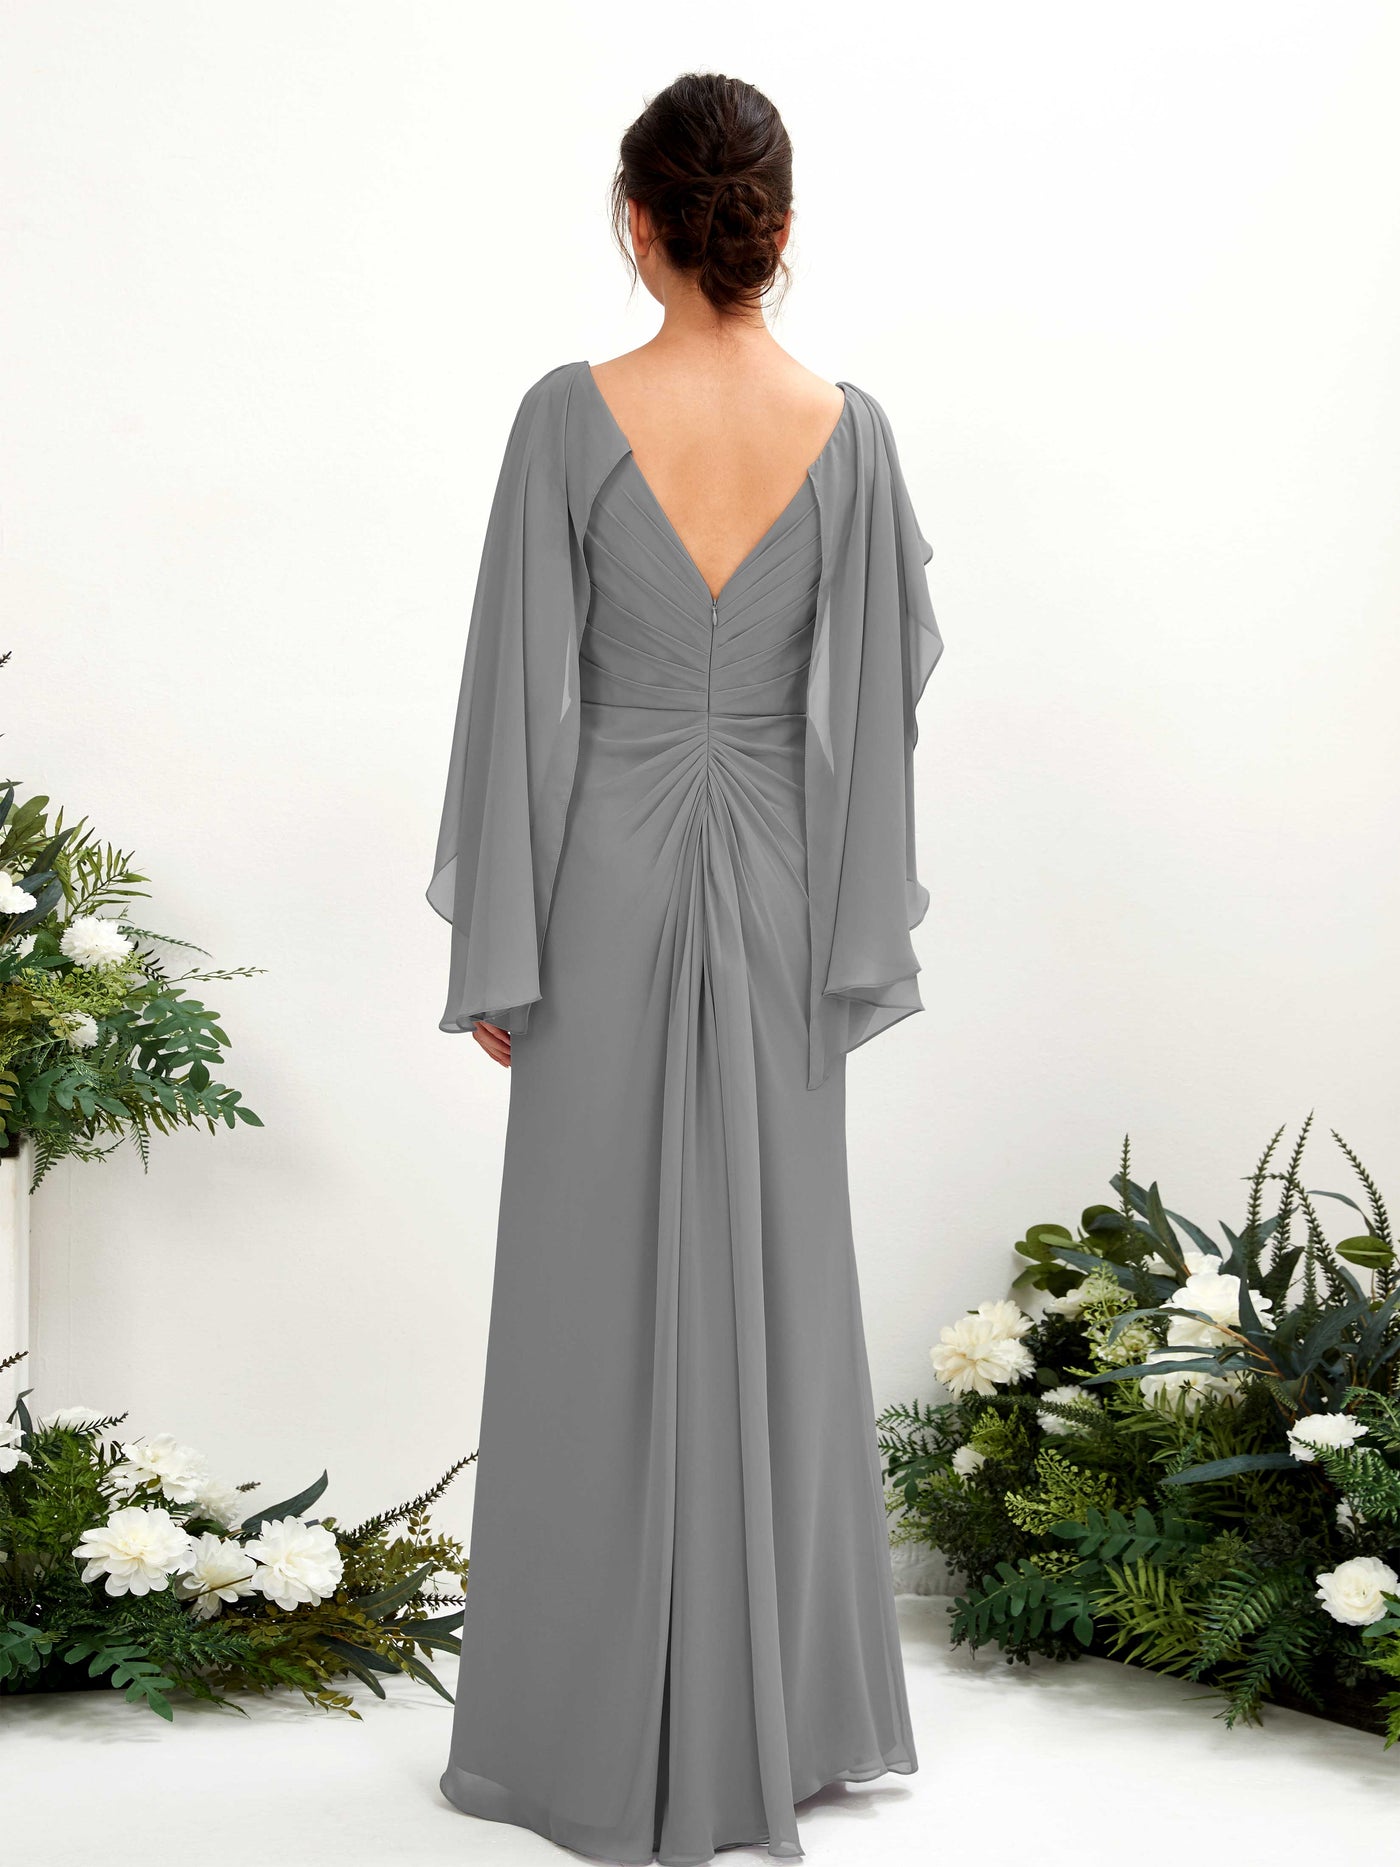 Steel Gray Bridesmaid Dresses Bridesmaid Dress A-line Chiffon Straps Full Length Long Sleeves Wedding Party Dress (80220120)#color_steel-gray